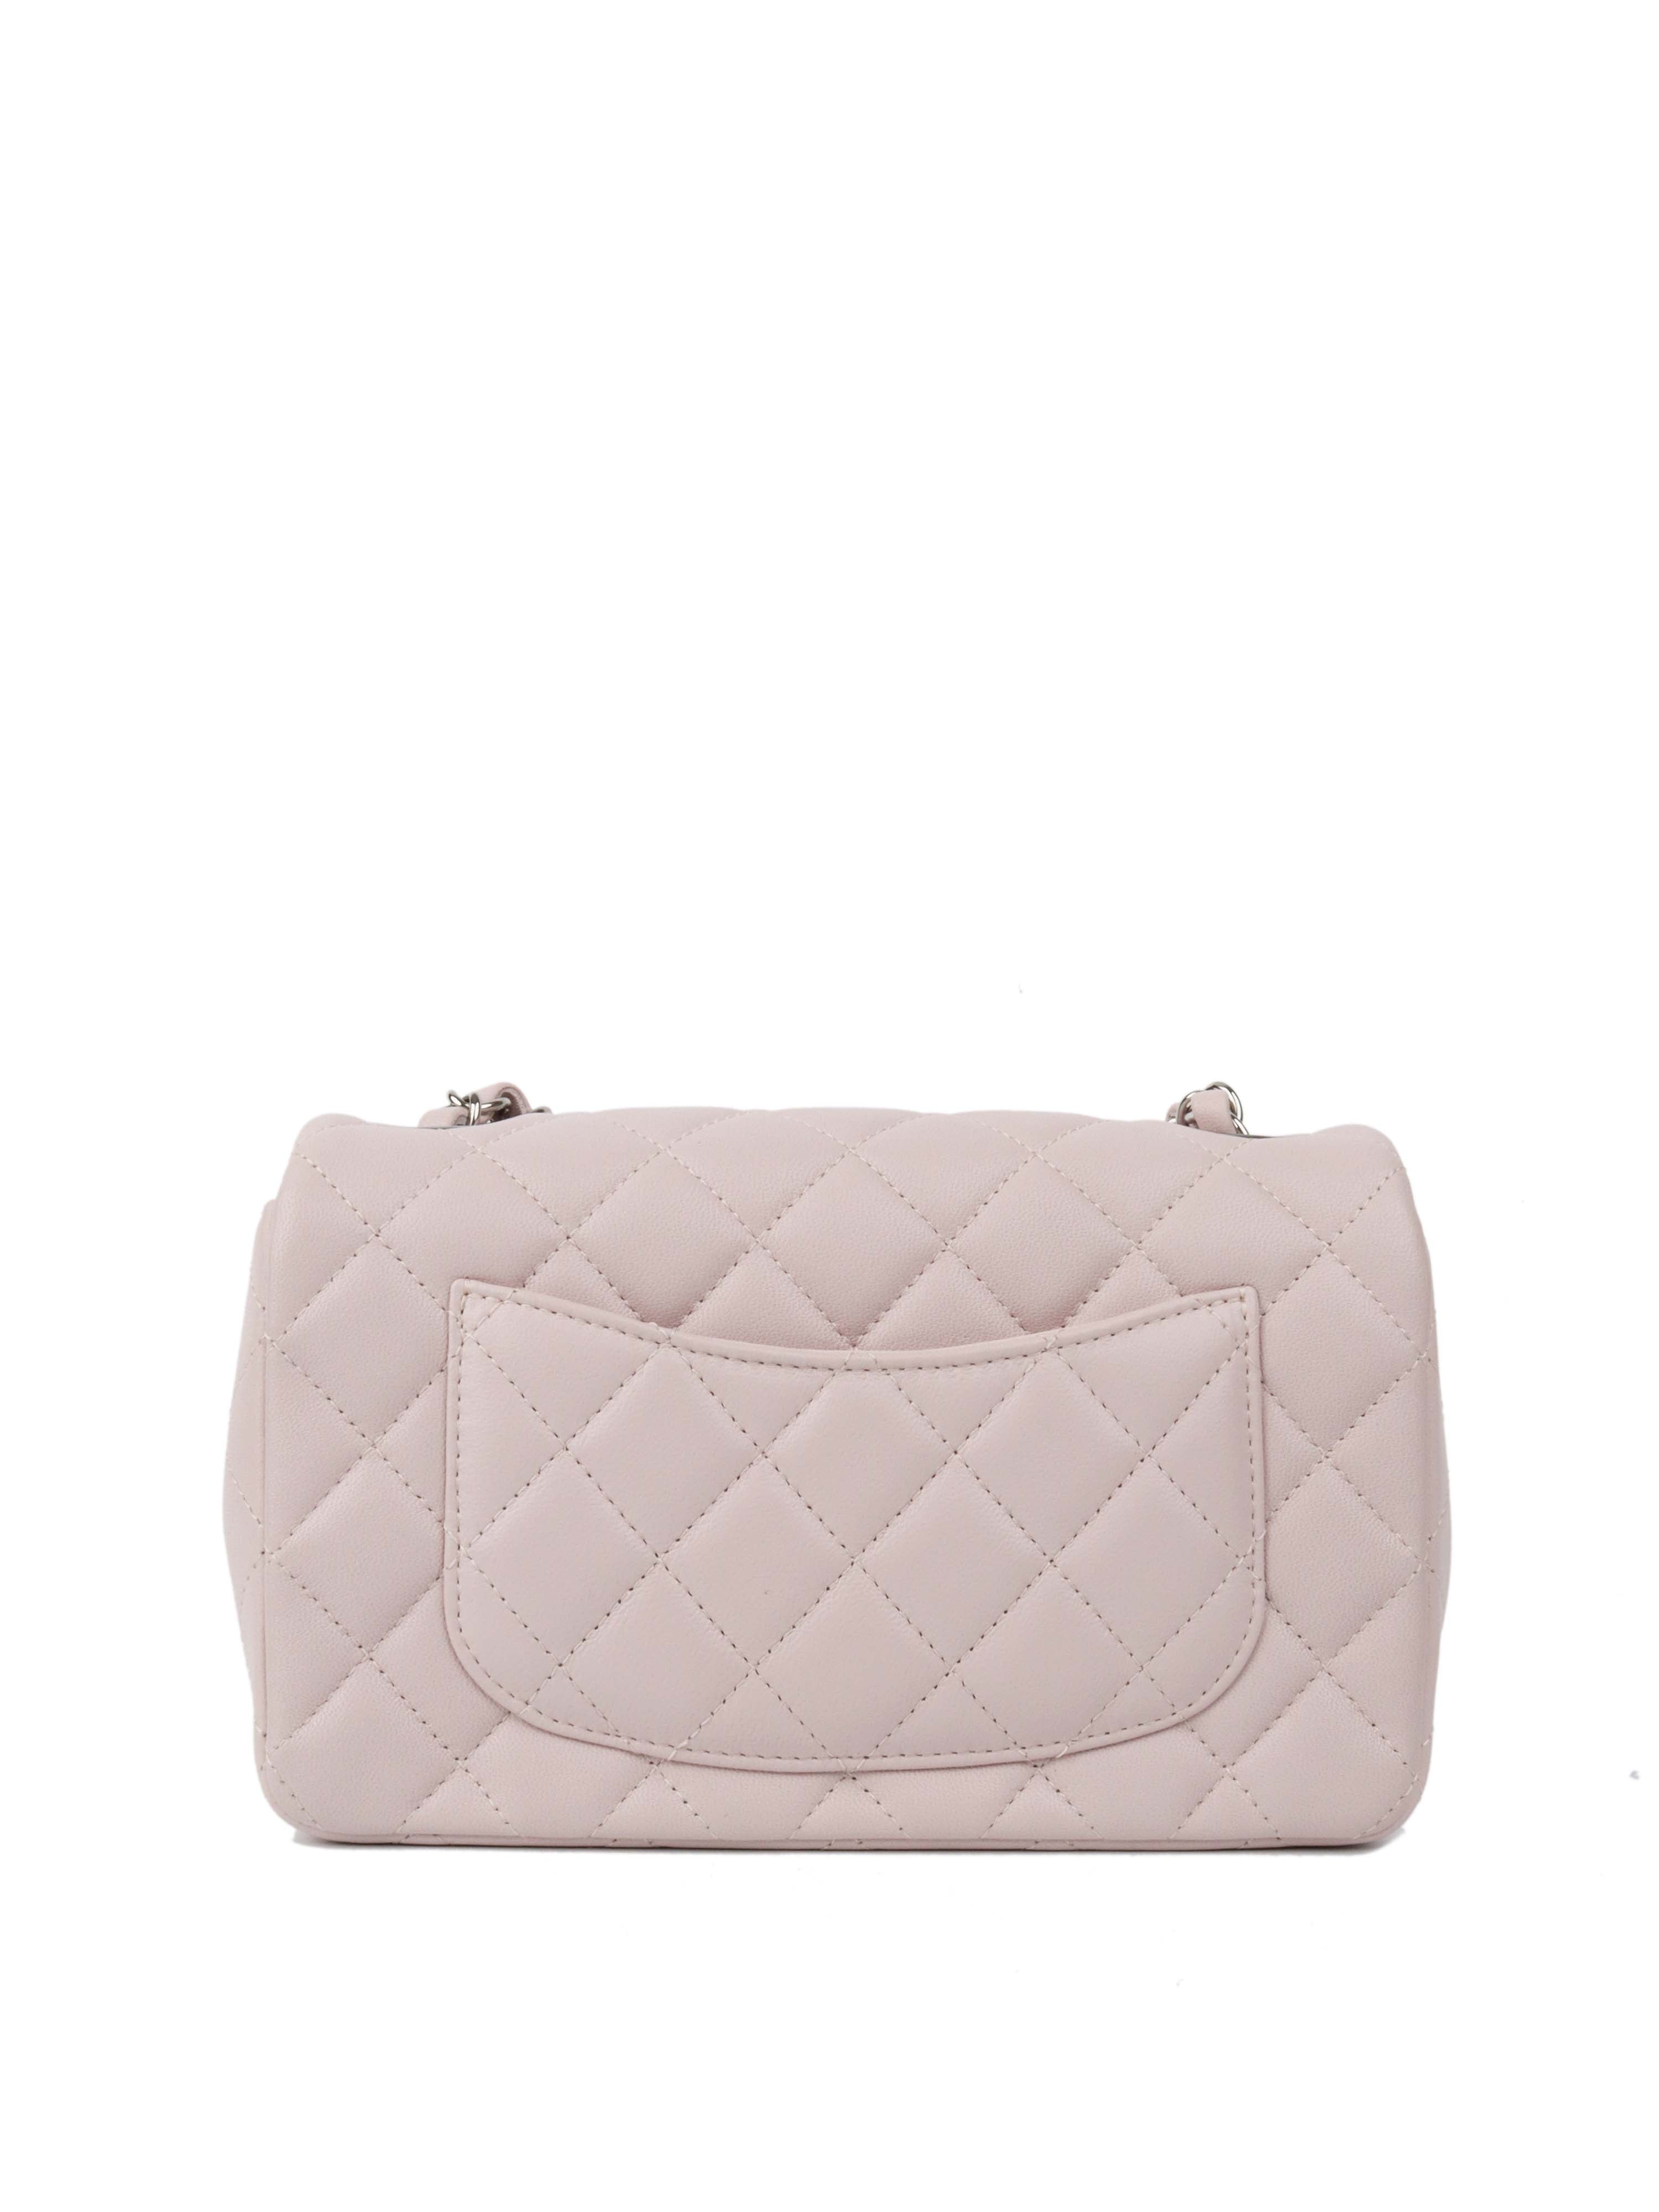 Chanel Classic Small Double Flap 22C Pink Caviar Leather, Gold Hardware,  New In Box P - Julia Rose Boston